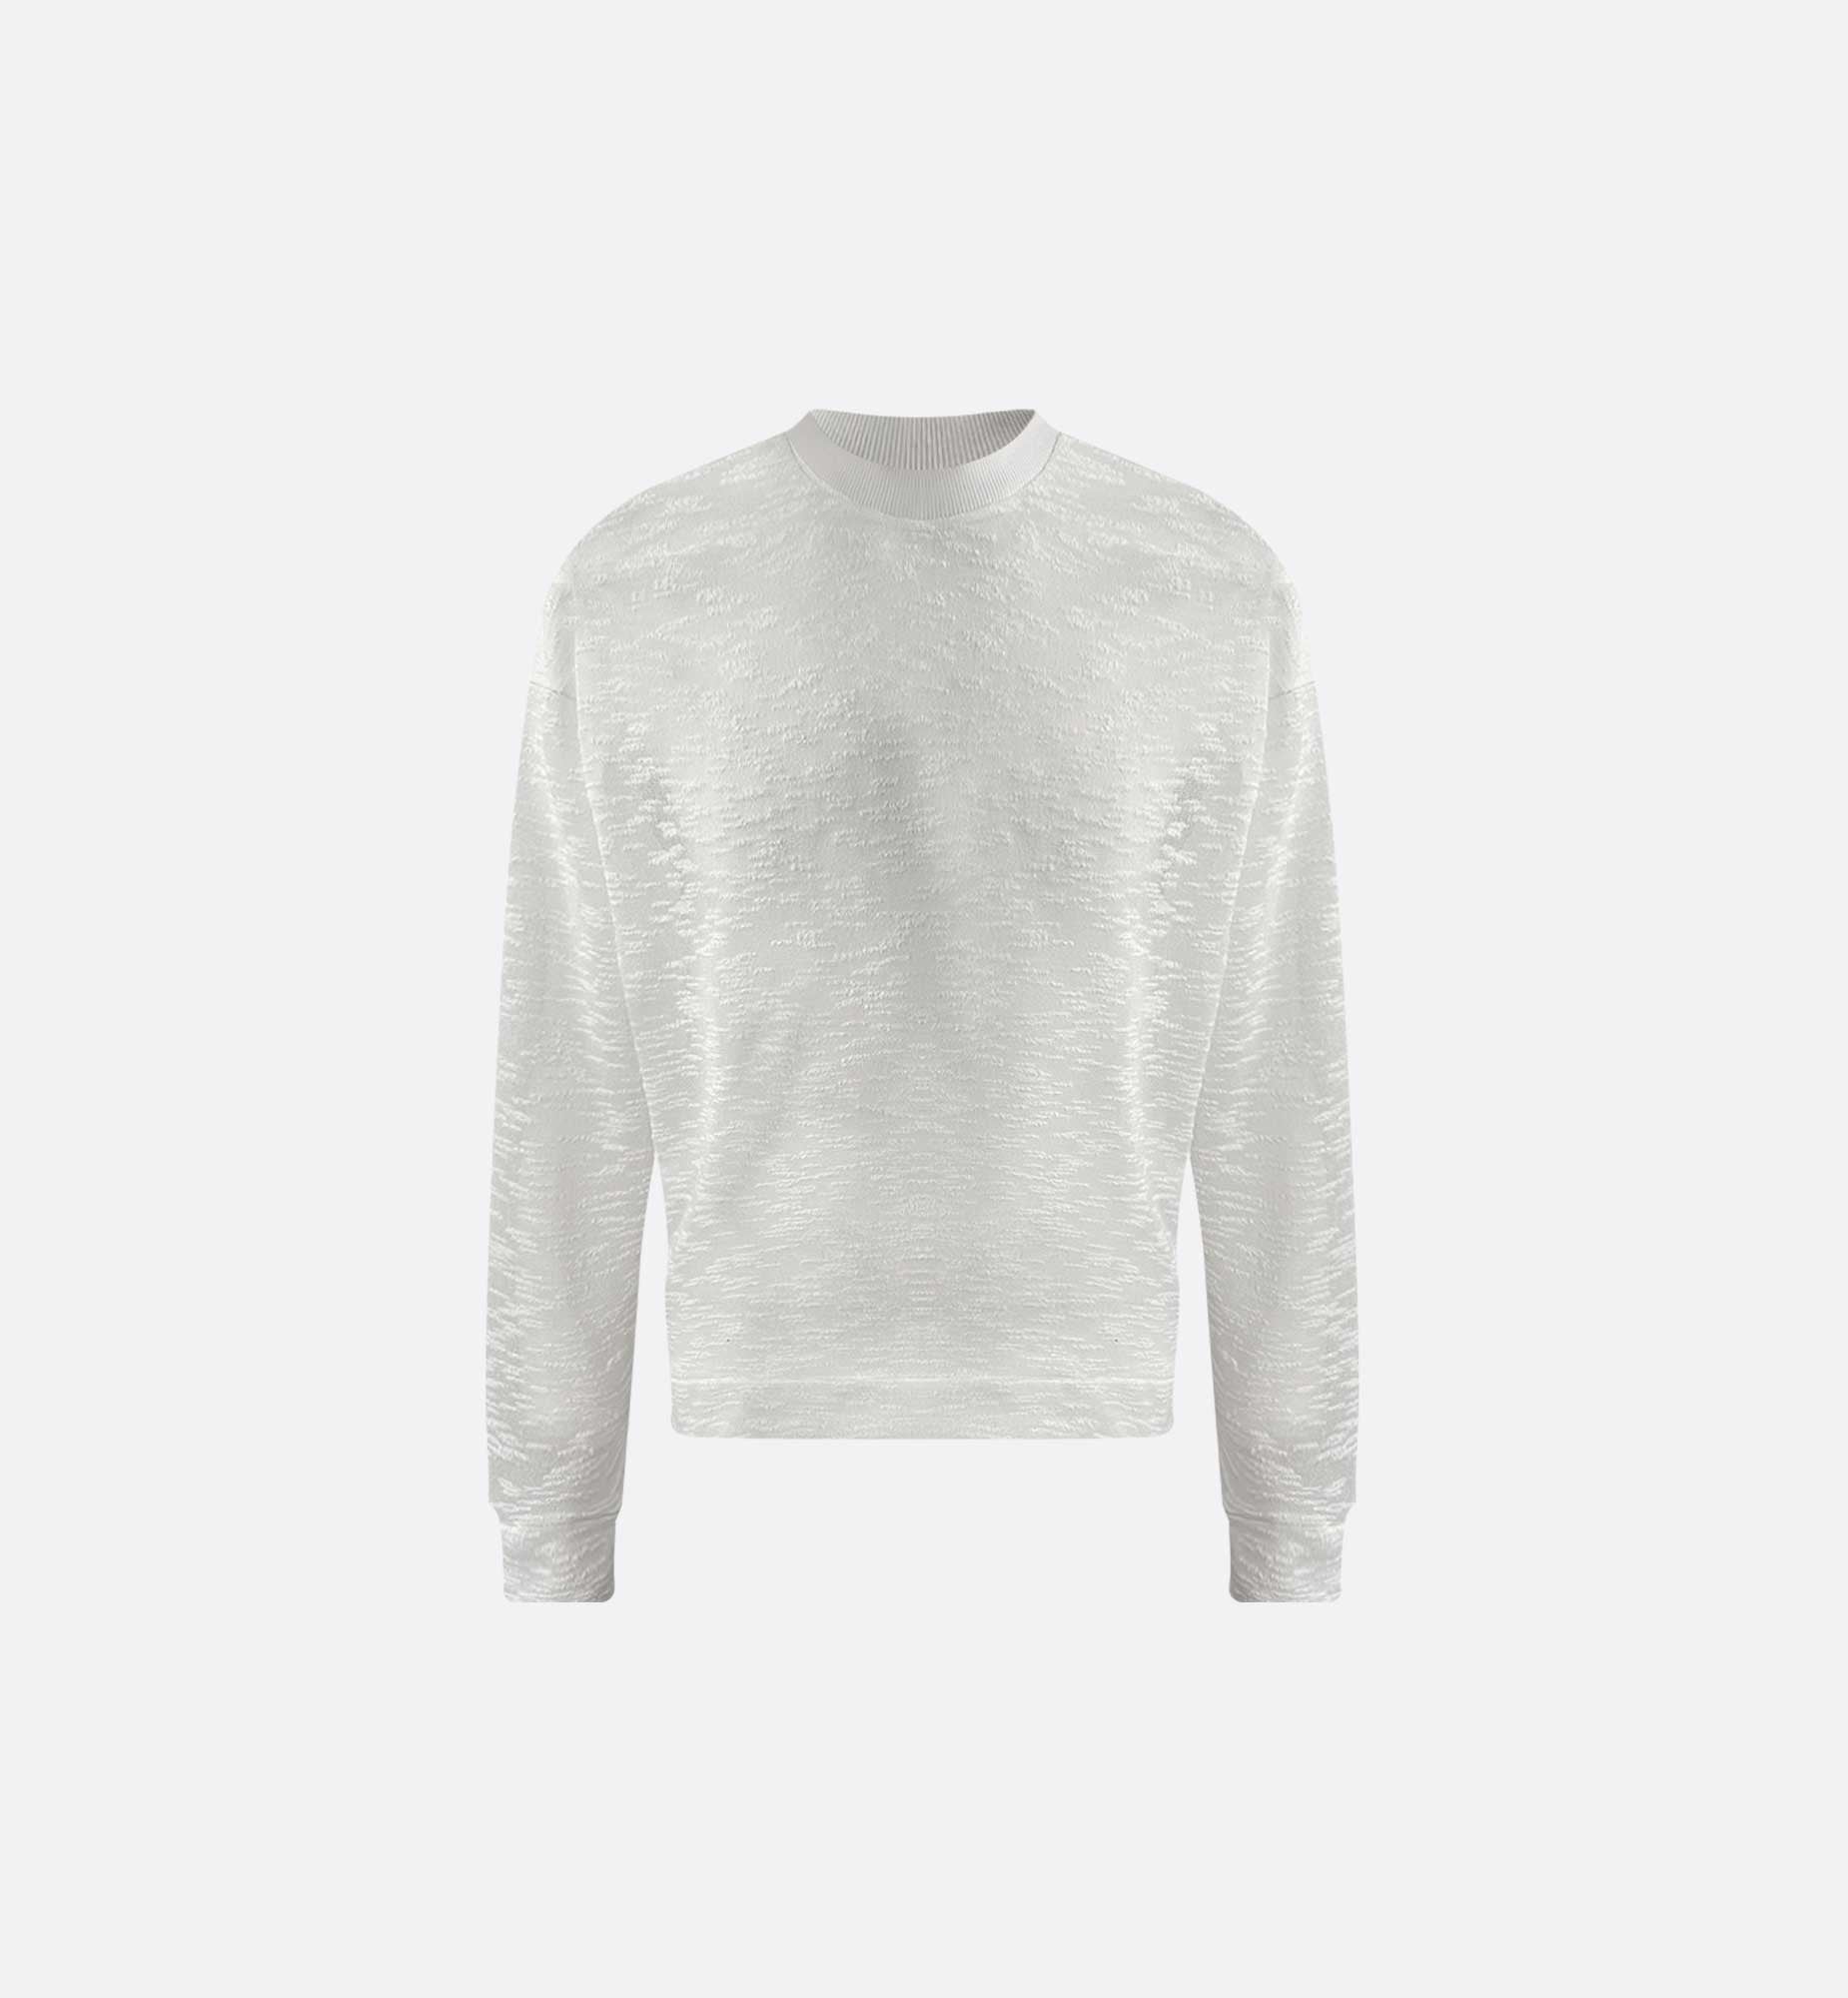 OFF-WHITE WOVEN KNIT CREW NECK SWEATER